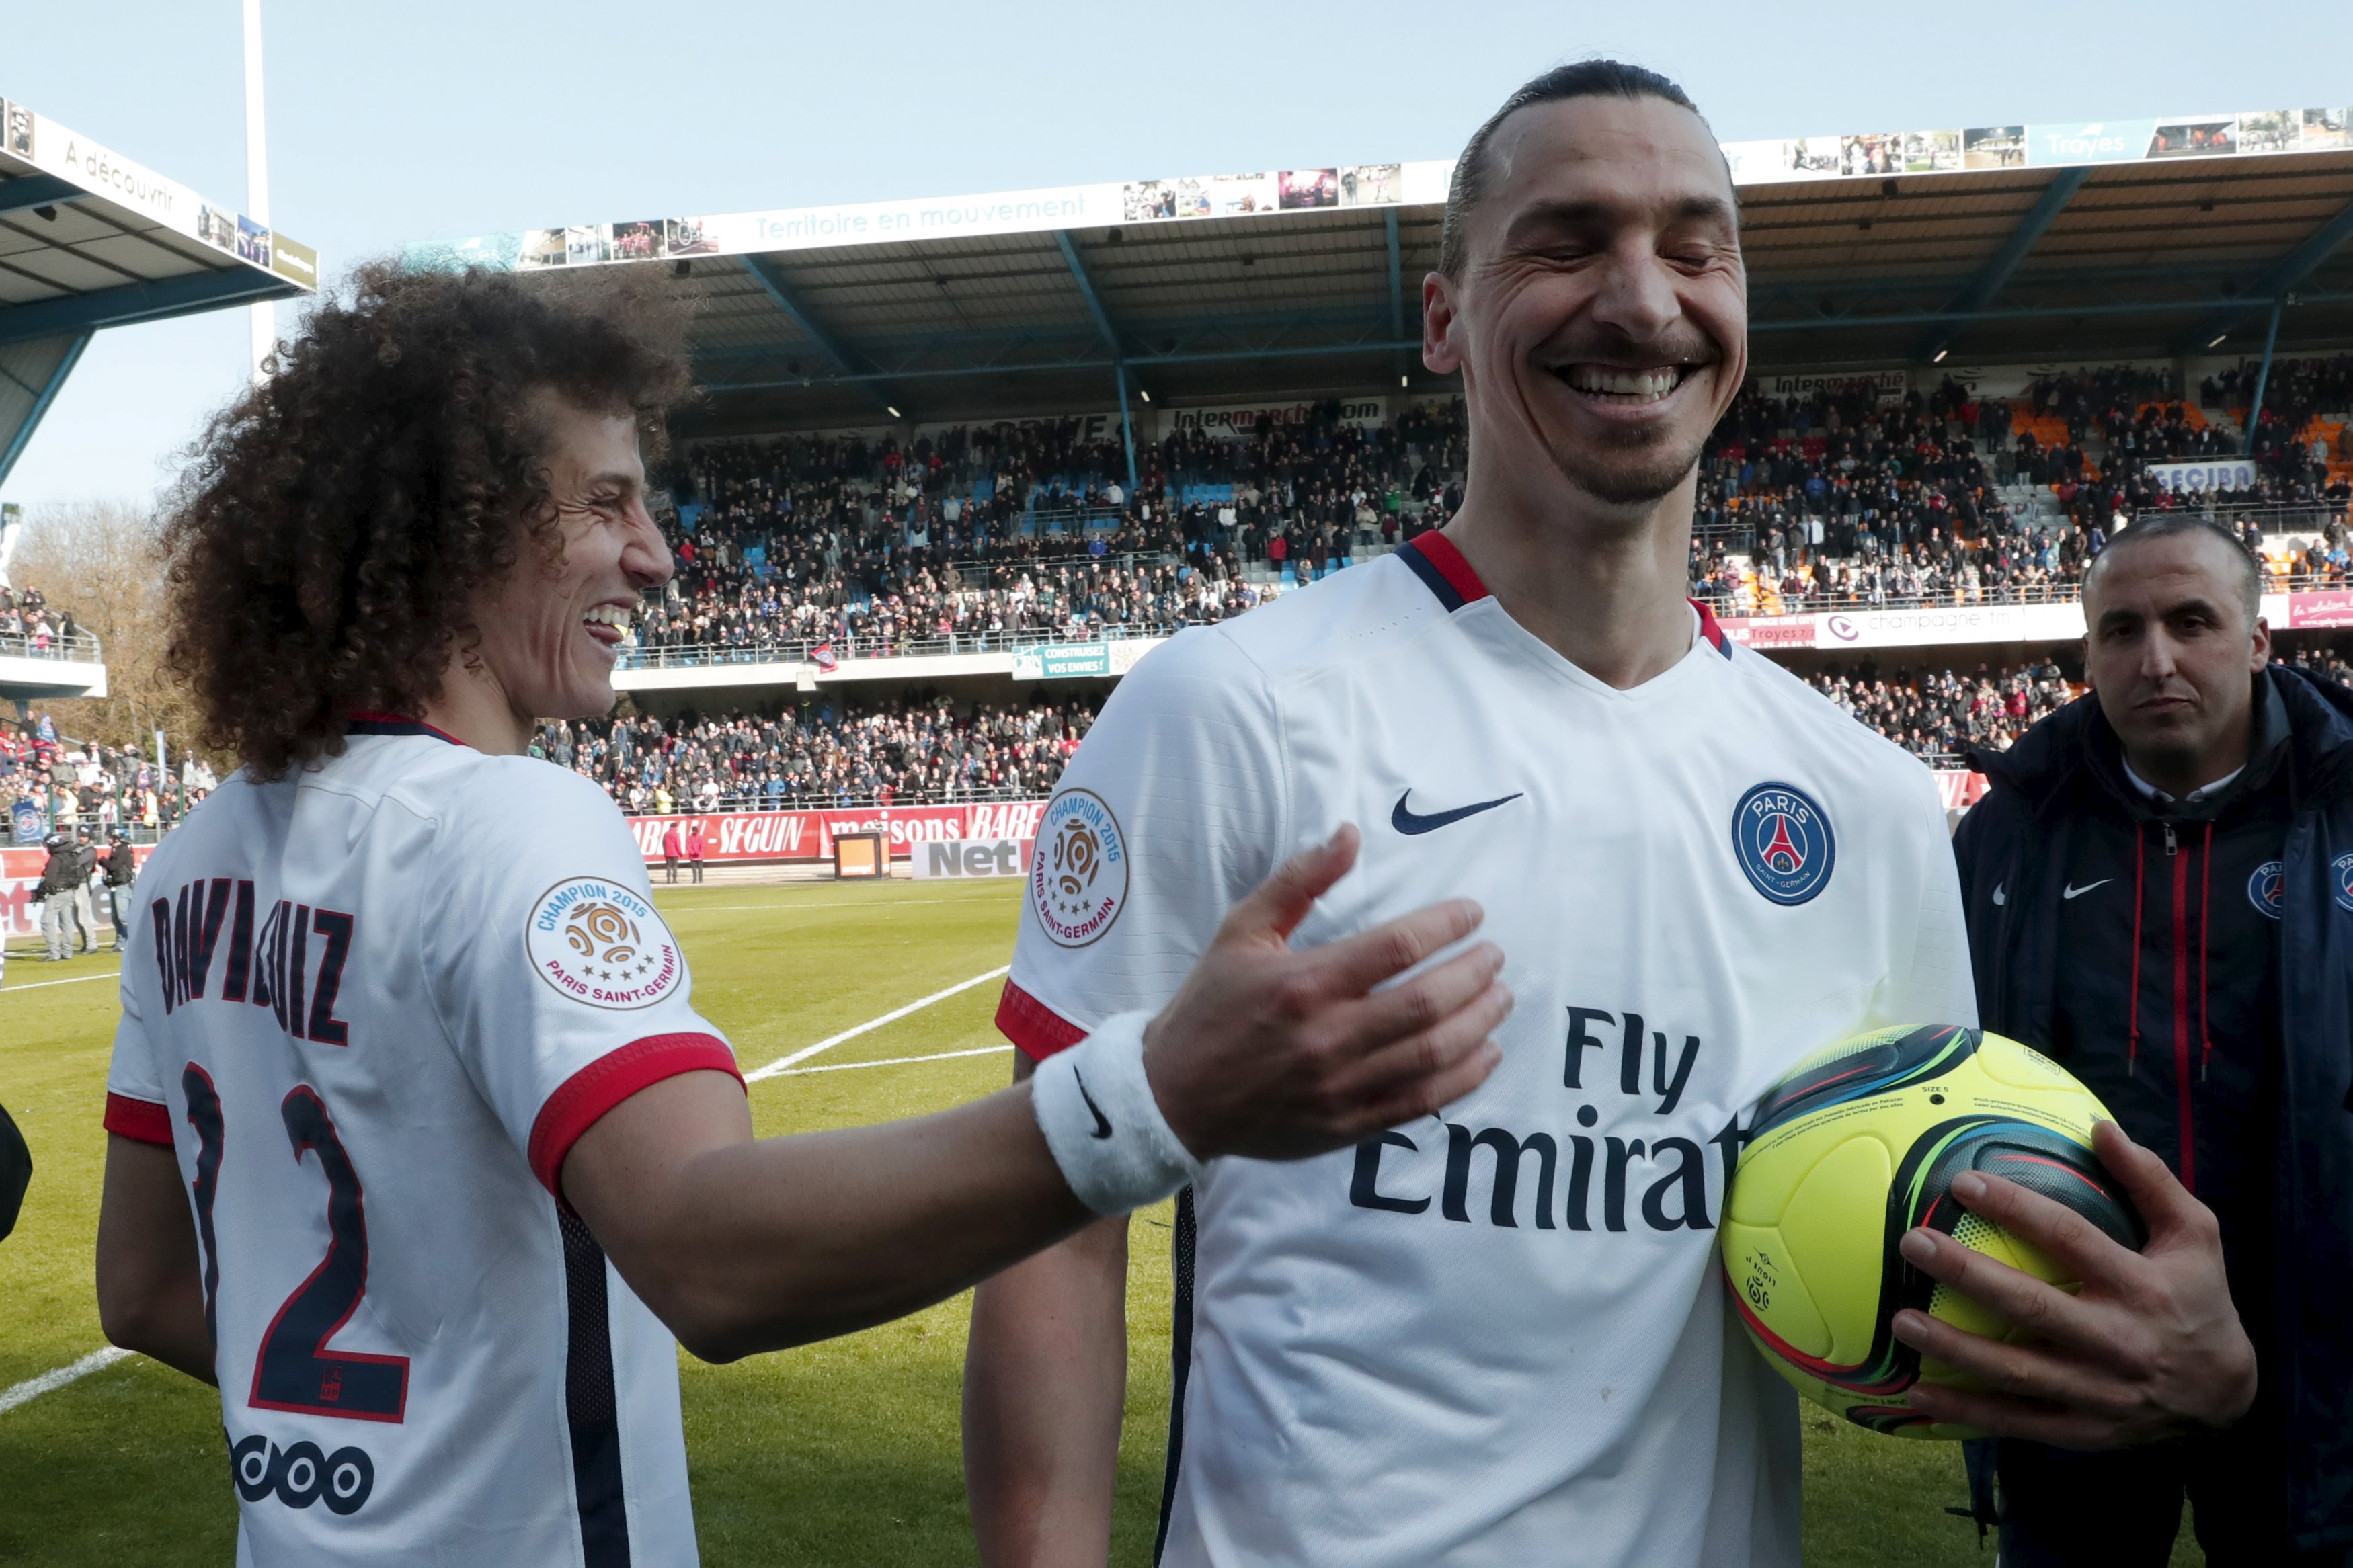 PSG demolish Troyes to clinch Ligue 1 title